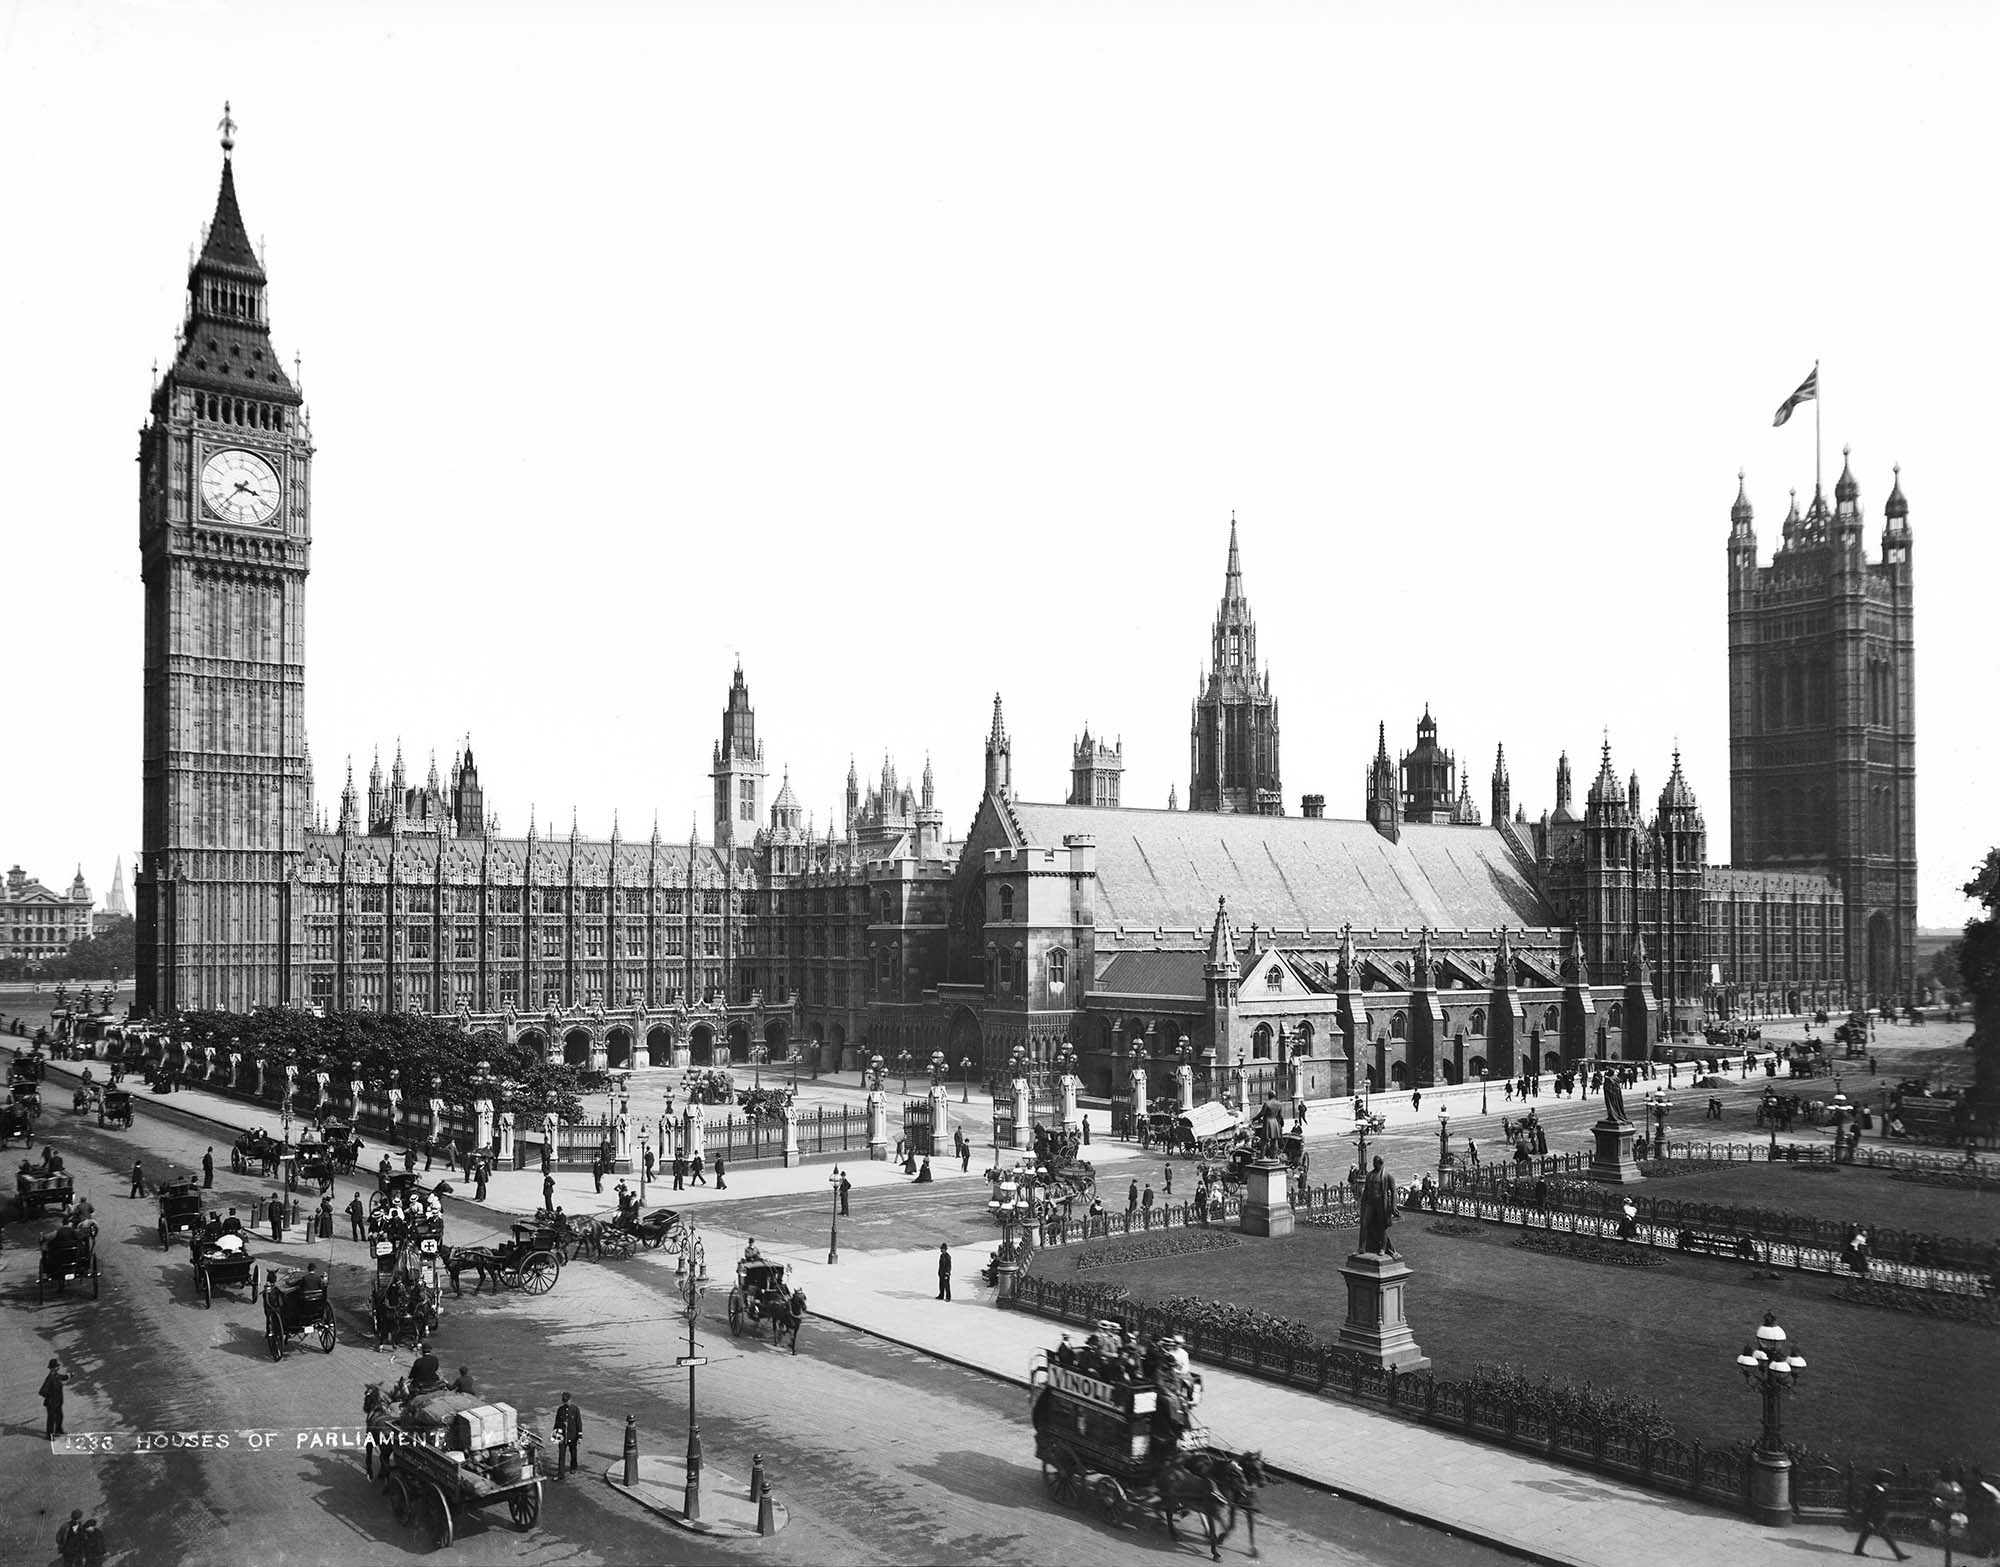 View of Big Ben and Westminster Palace